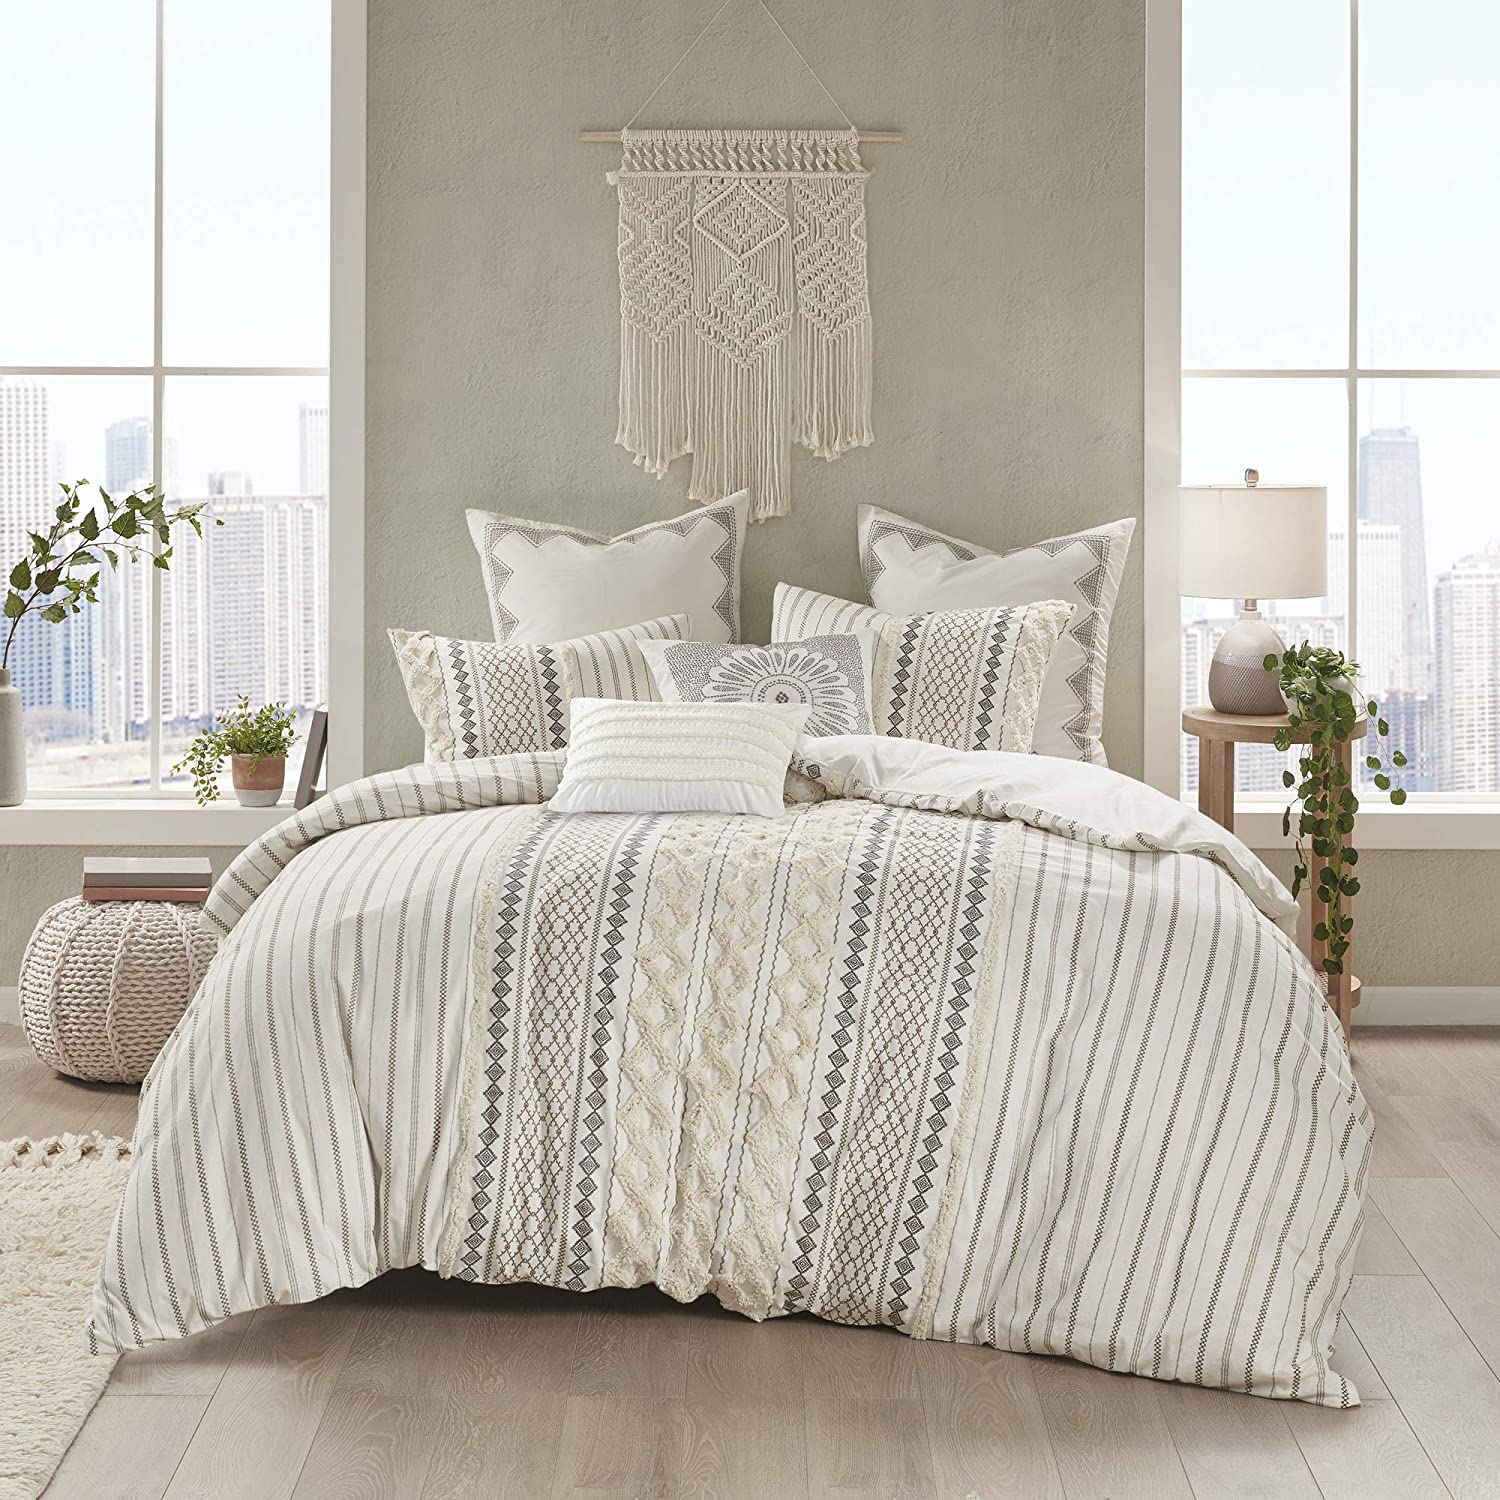 Price:$112.36  100% Cotton Duvet Mid Century Modern Design All Season Comforter Cover Bedding Set, Matching Shams, King/Cal King (104"x92"), Imani, Ivory Chenille Tufted Accent : Office Products